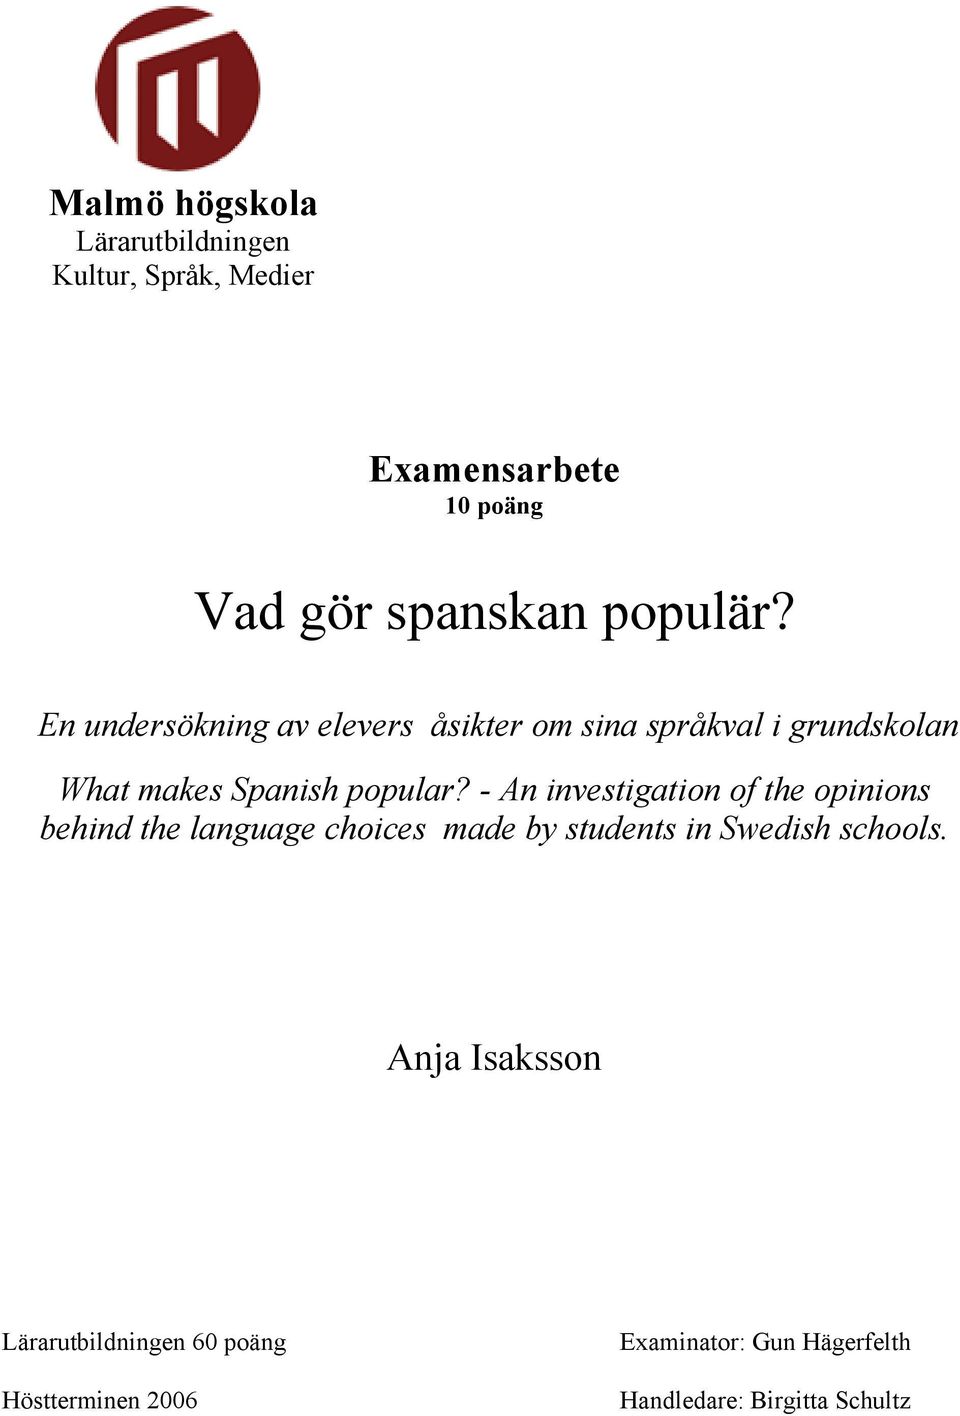 - An investigation of the opinions behind the language choices made by students in Swedish schools.